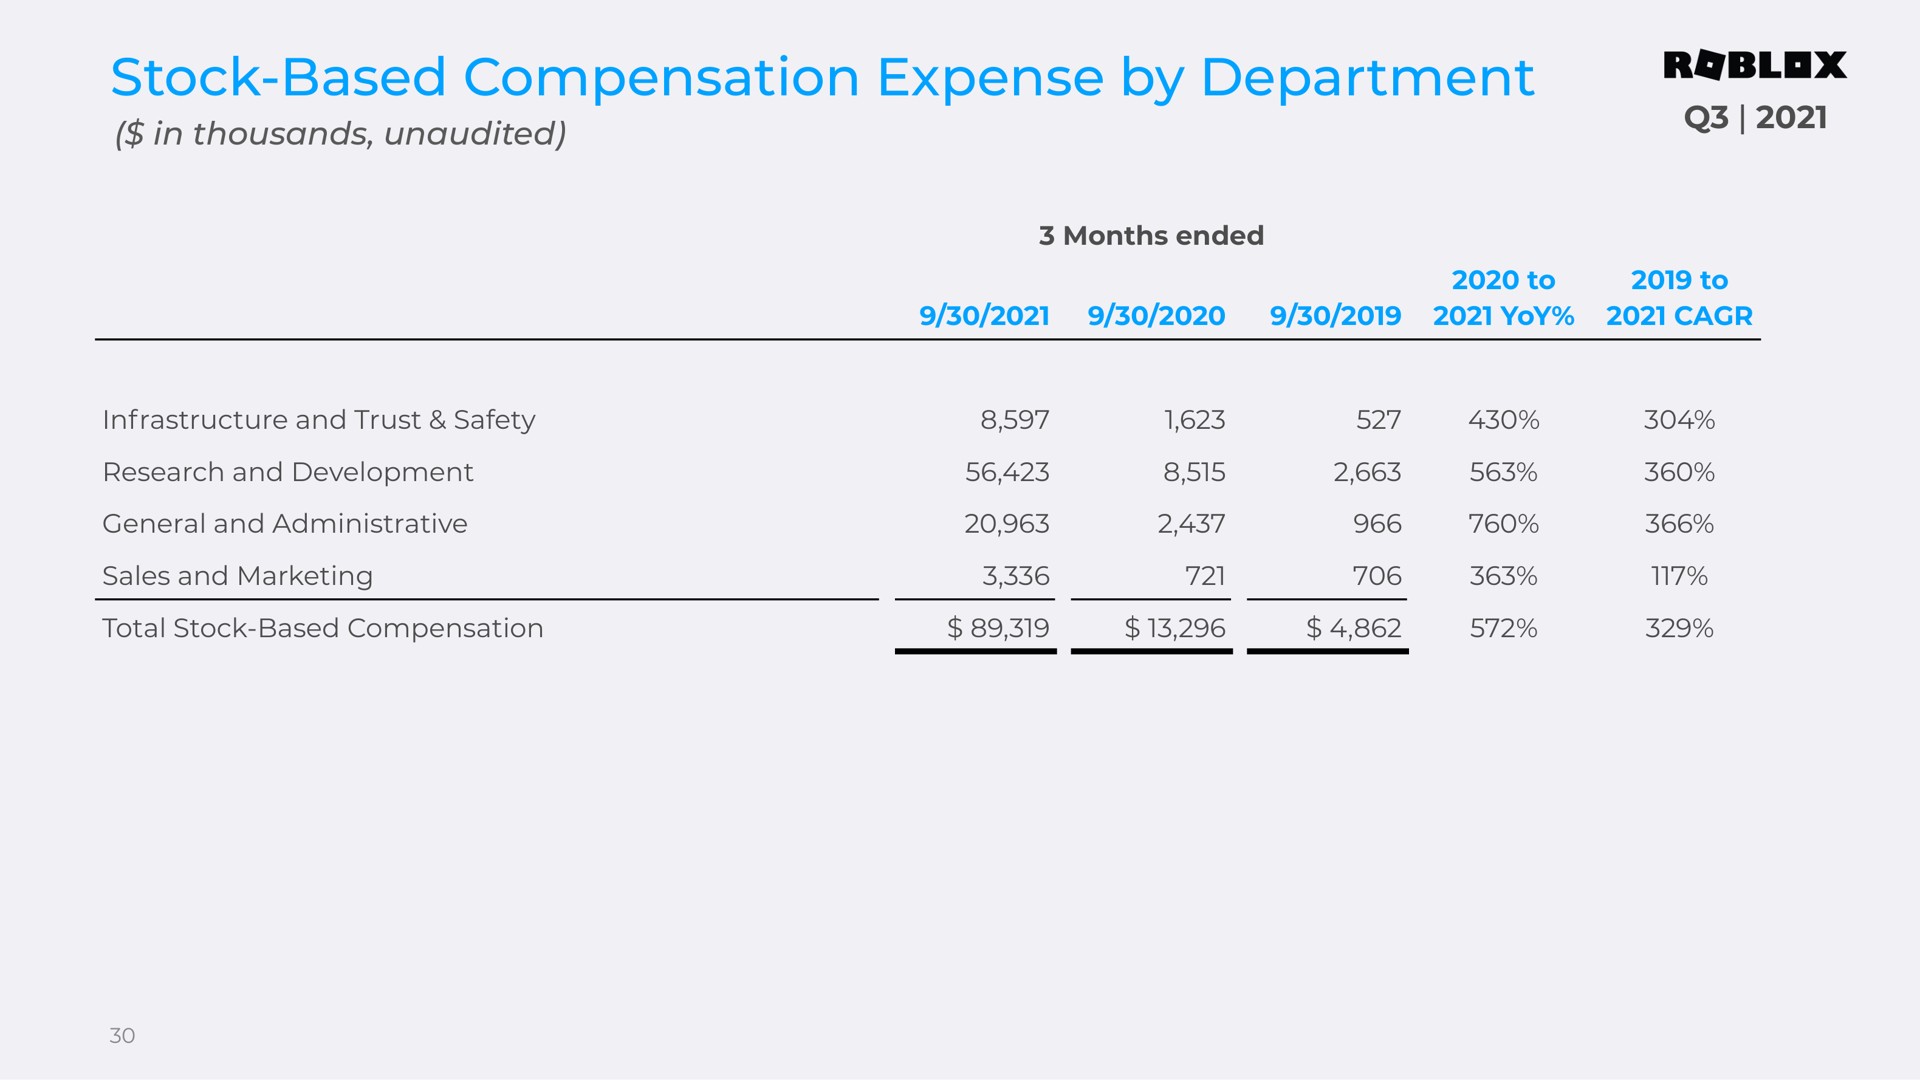 stock based compensation expense by department reviewed | Roblox